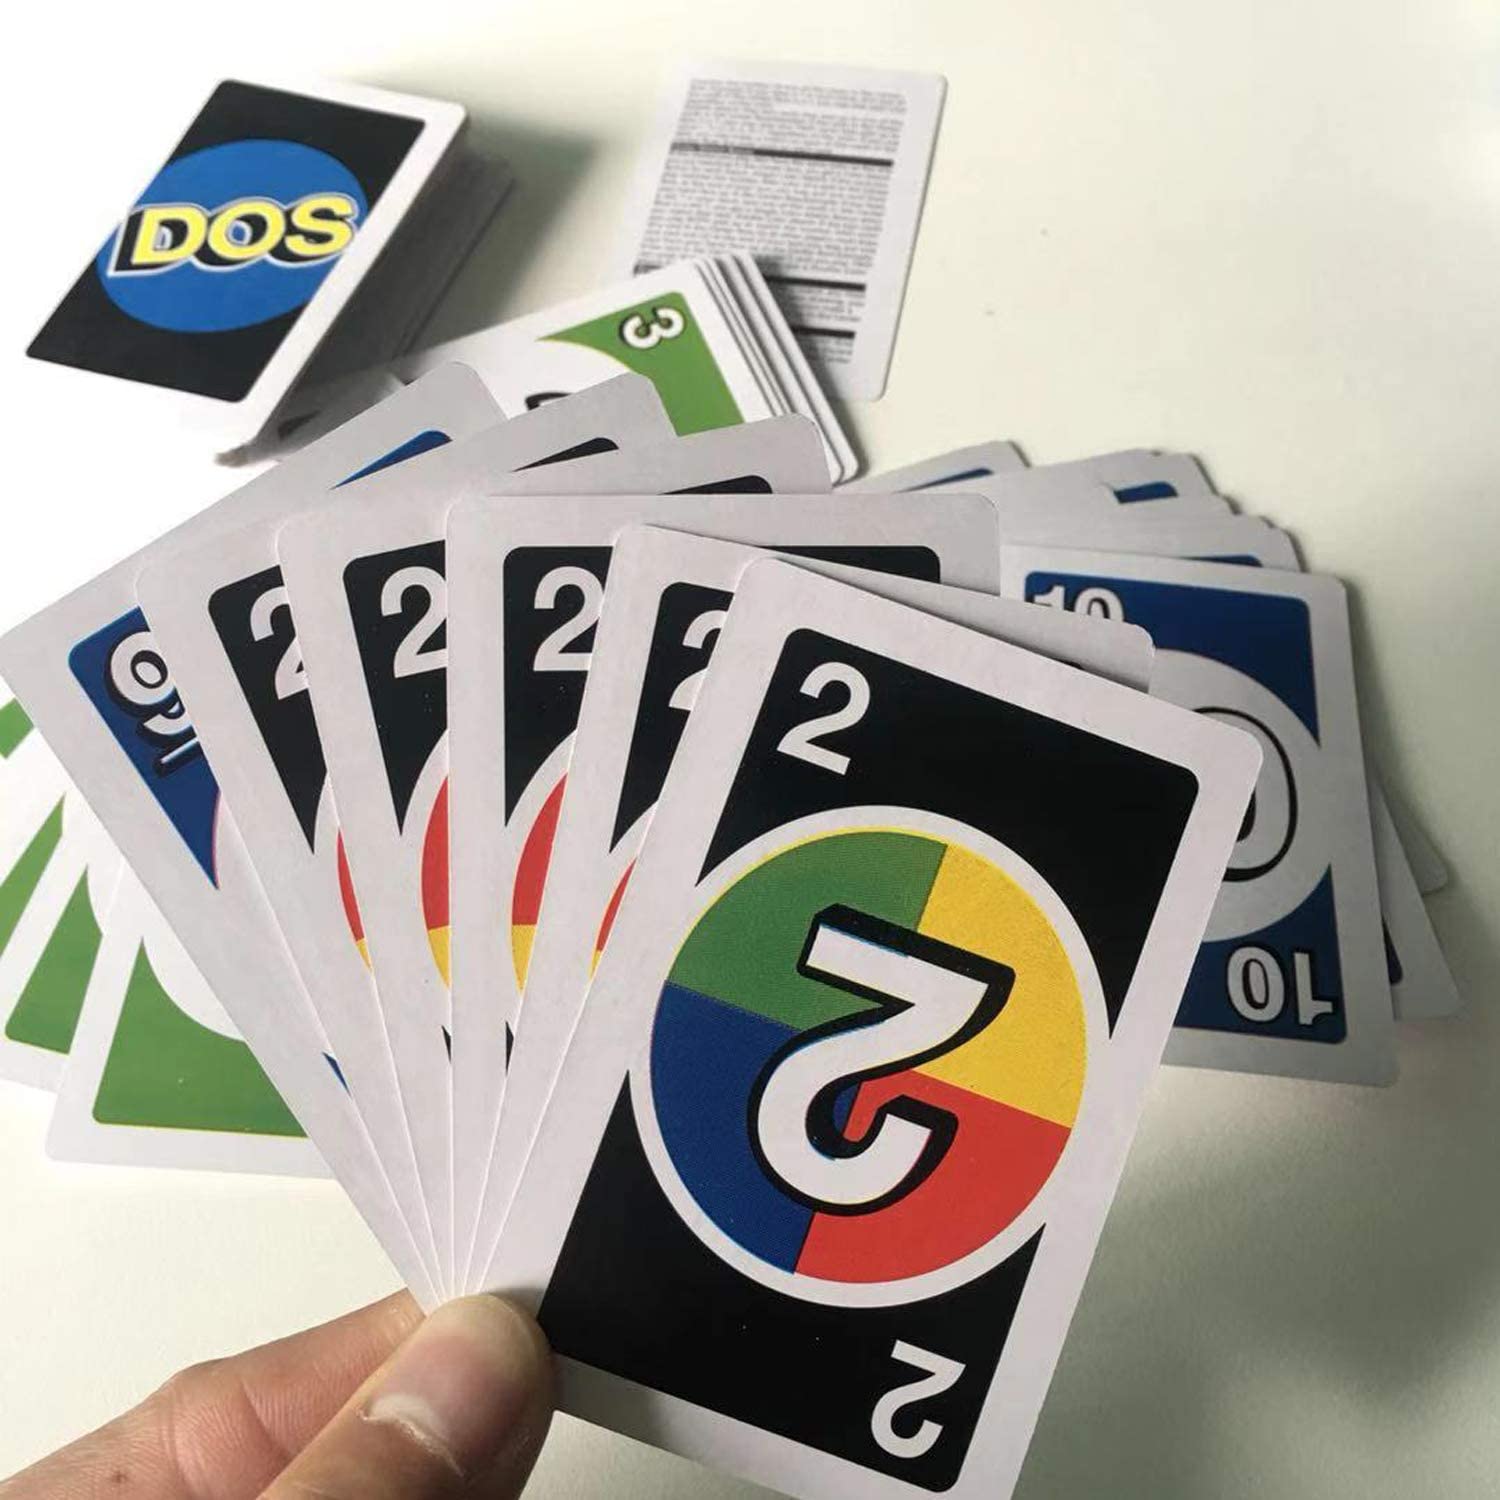 DOS-From the Makers of UNO